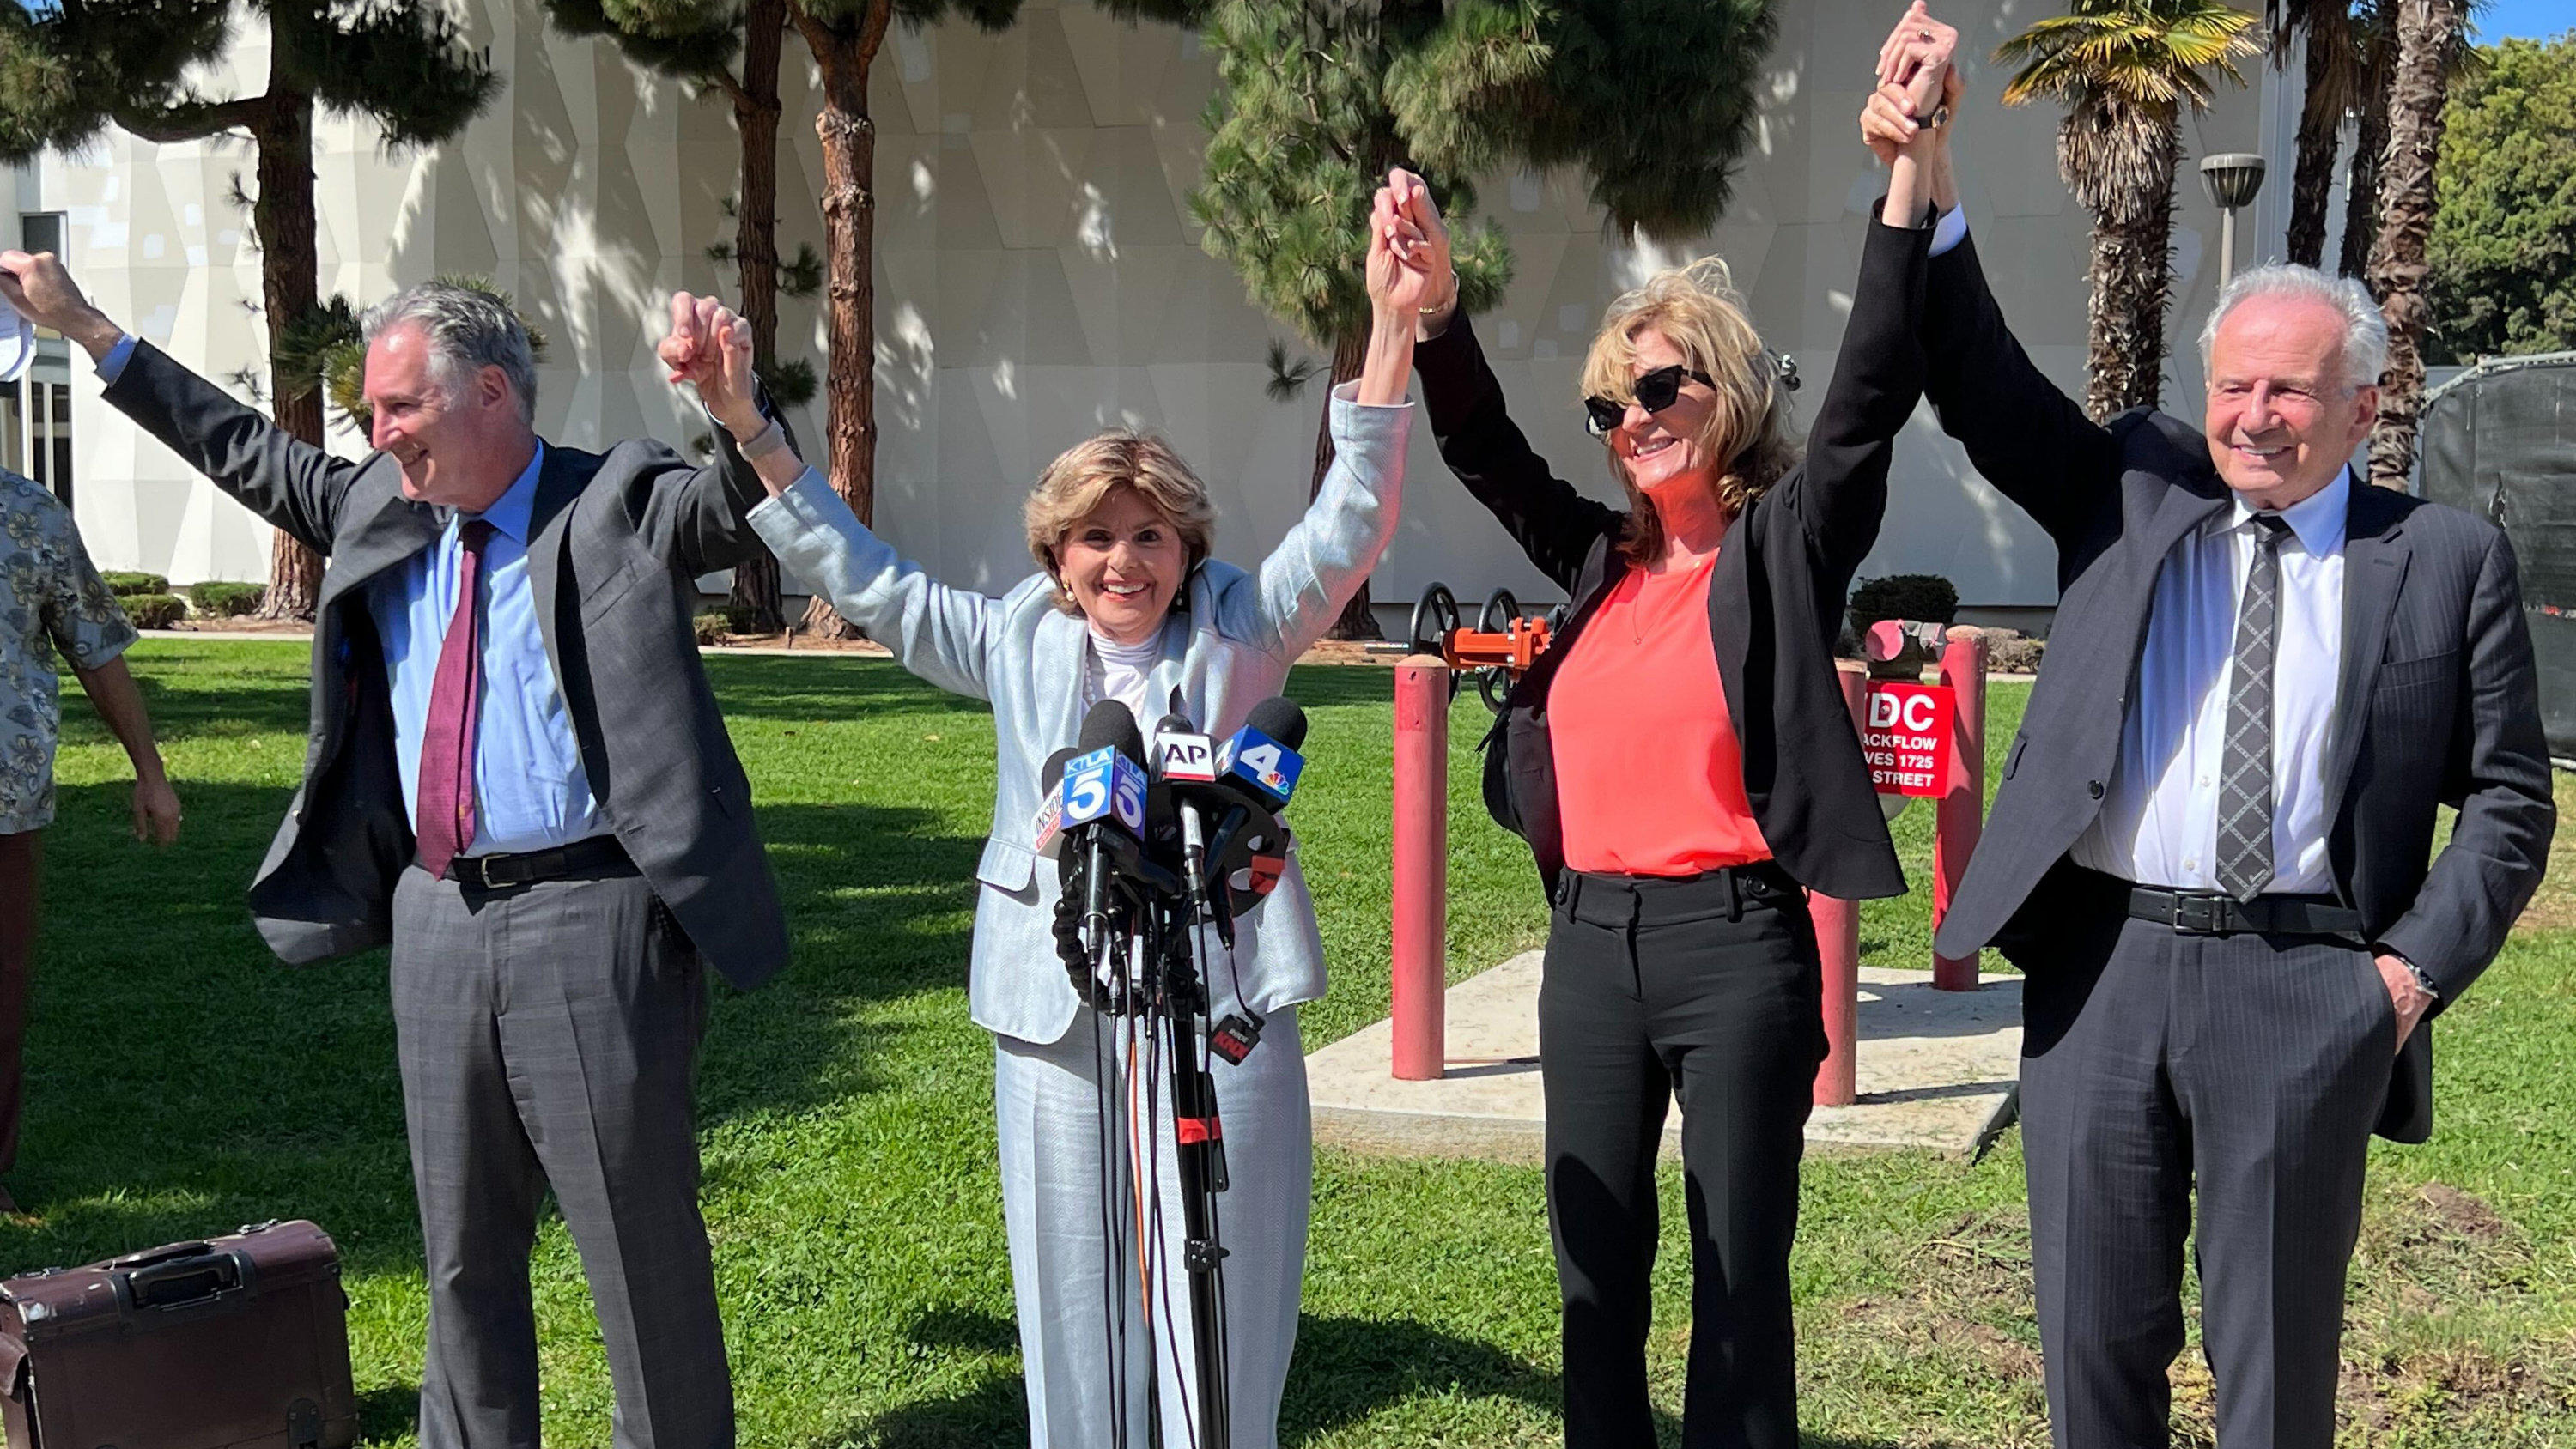 Attorneys John West, from left, Gloria Allred, plaintiff Judy Huth and attorney Nathan Goldberg join arms following a verdict in Huth's favor in a civil trial involving actor Bill Cosby outside the Santa Monica Courthouse on Tuesday, March 21, 2022. 